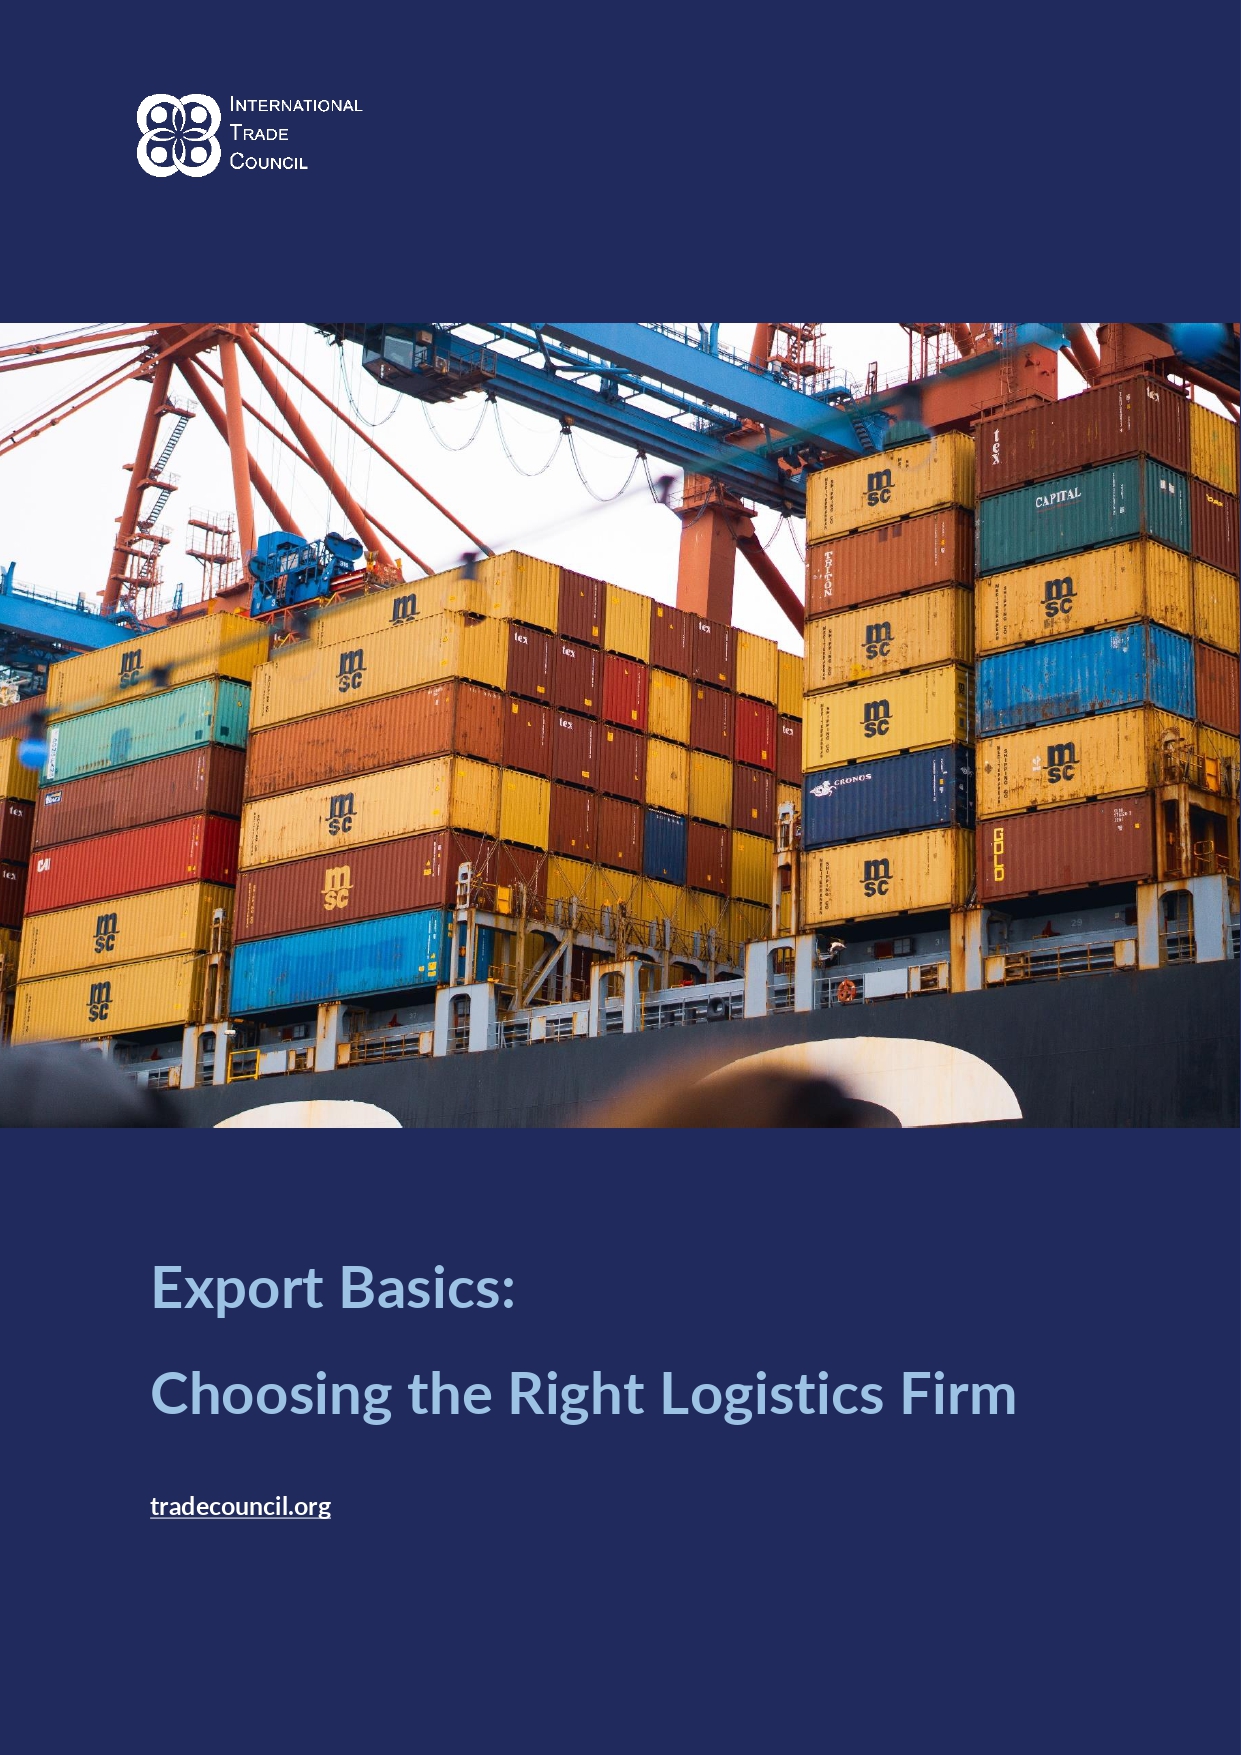 Choosing the Right Logistics Firm from the International Trade Council your international chamber of commerce.